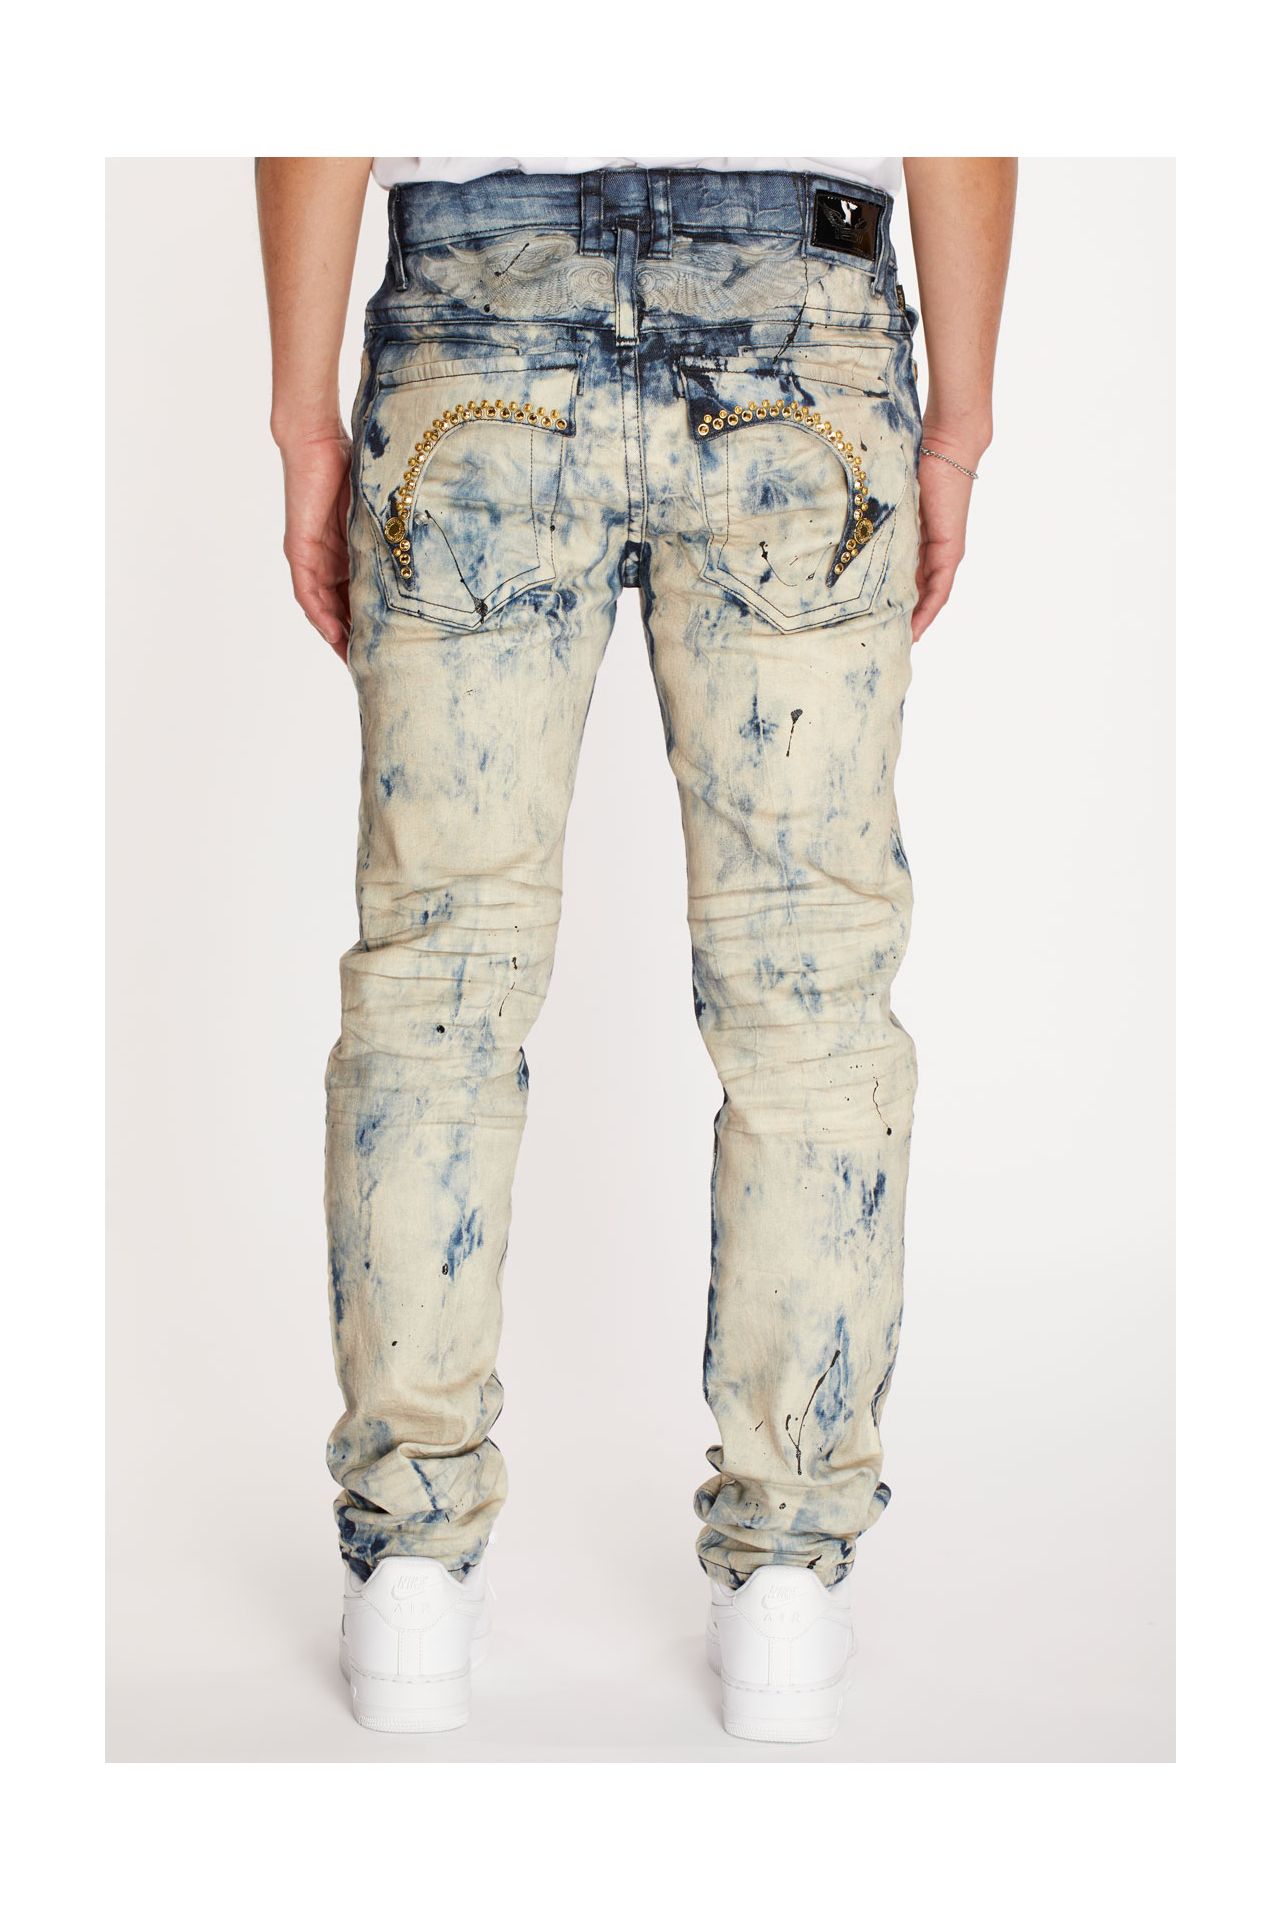 KILLER FLAP MENS SKINNY JEANS IN FROZEN WASH WITH GOLD CRYSTALS